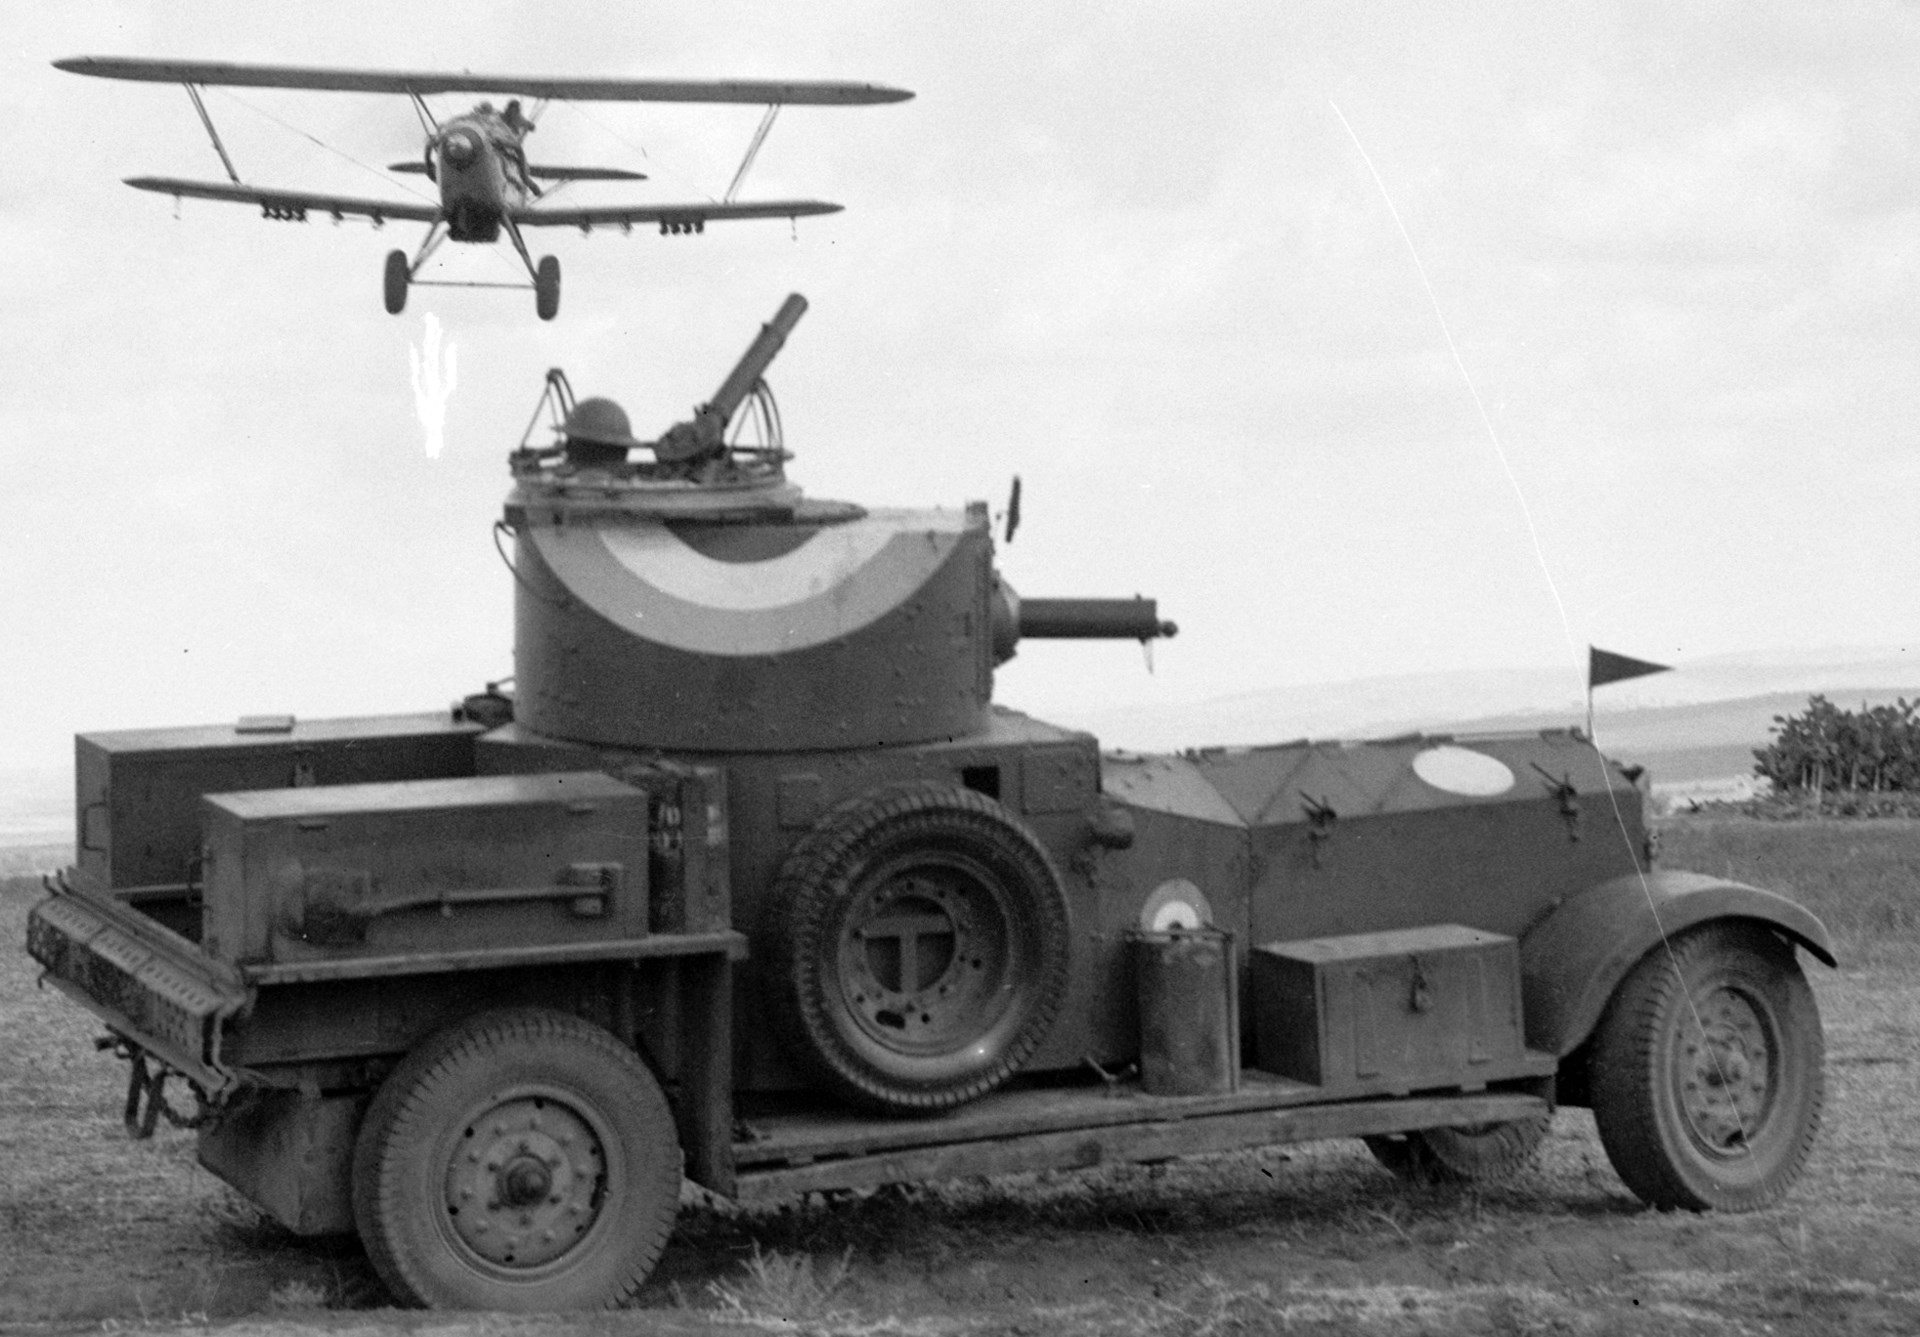 The RAF played an important role in the British intervention—the RAF sent two groups of “Car, Armoured, Rolls Royce Type A” cars to Palestine.  The RAF armored cars featured the standard Vickers MG (.303) in the turret, along with a Lewis gun in a rotating AA mount.  British light bombers were quickly airborne to interdict Arab attacks and did so nearly fifty times during the revolt.  Library of Congress